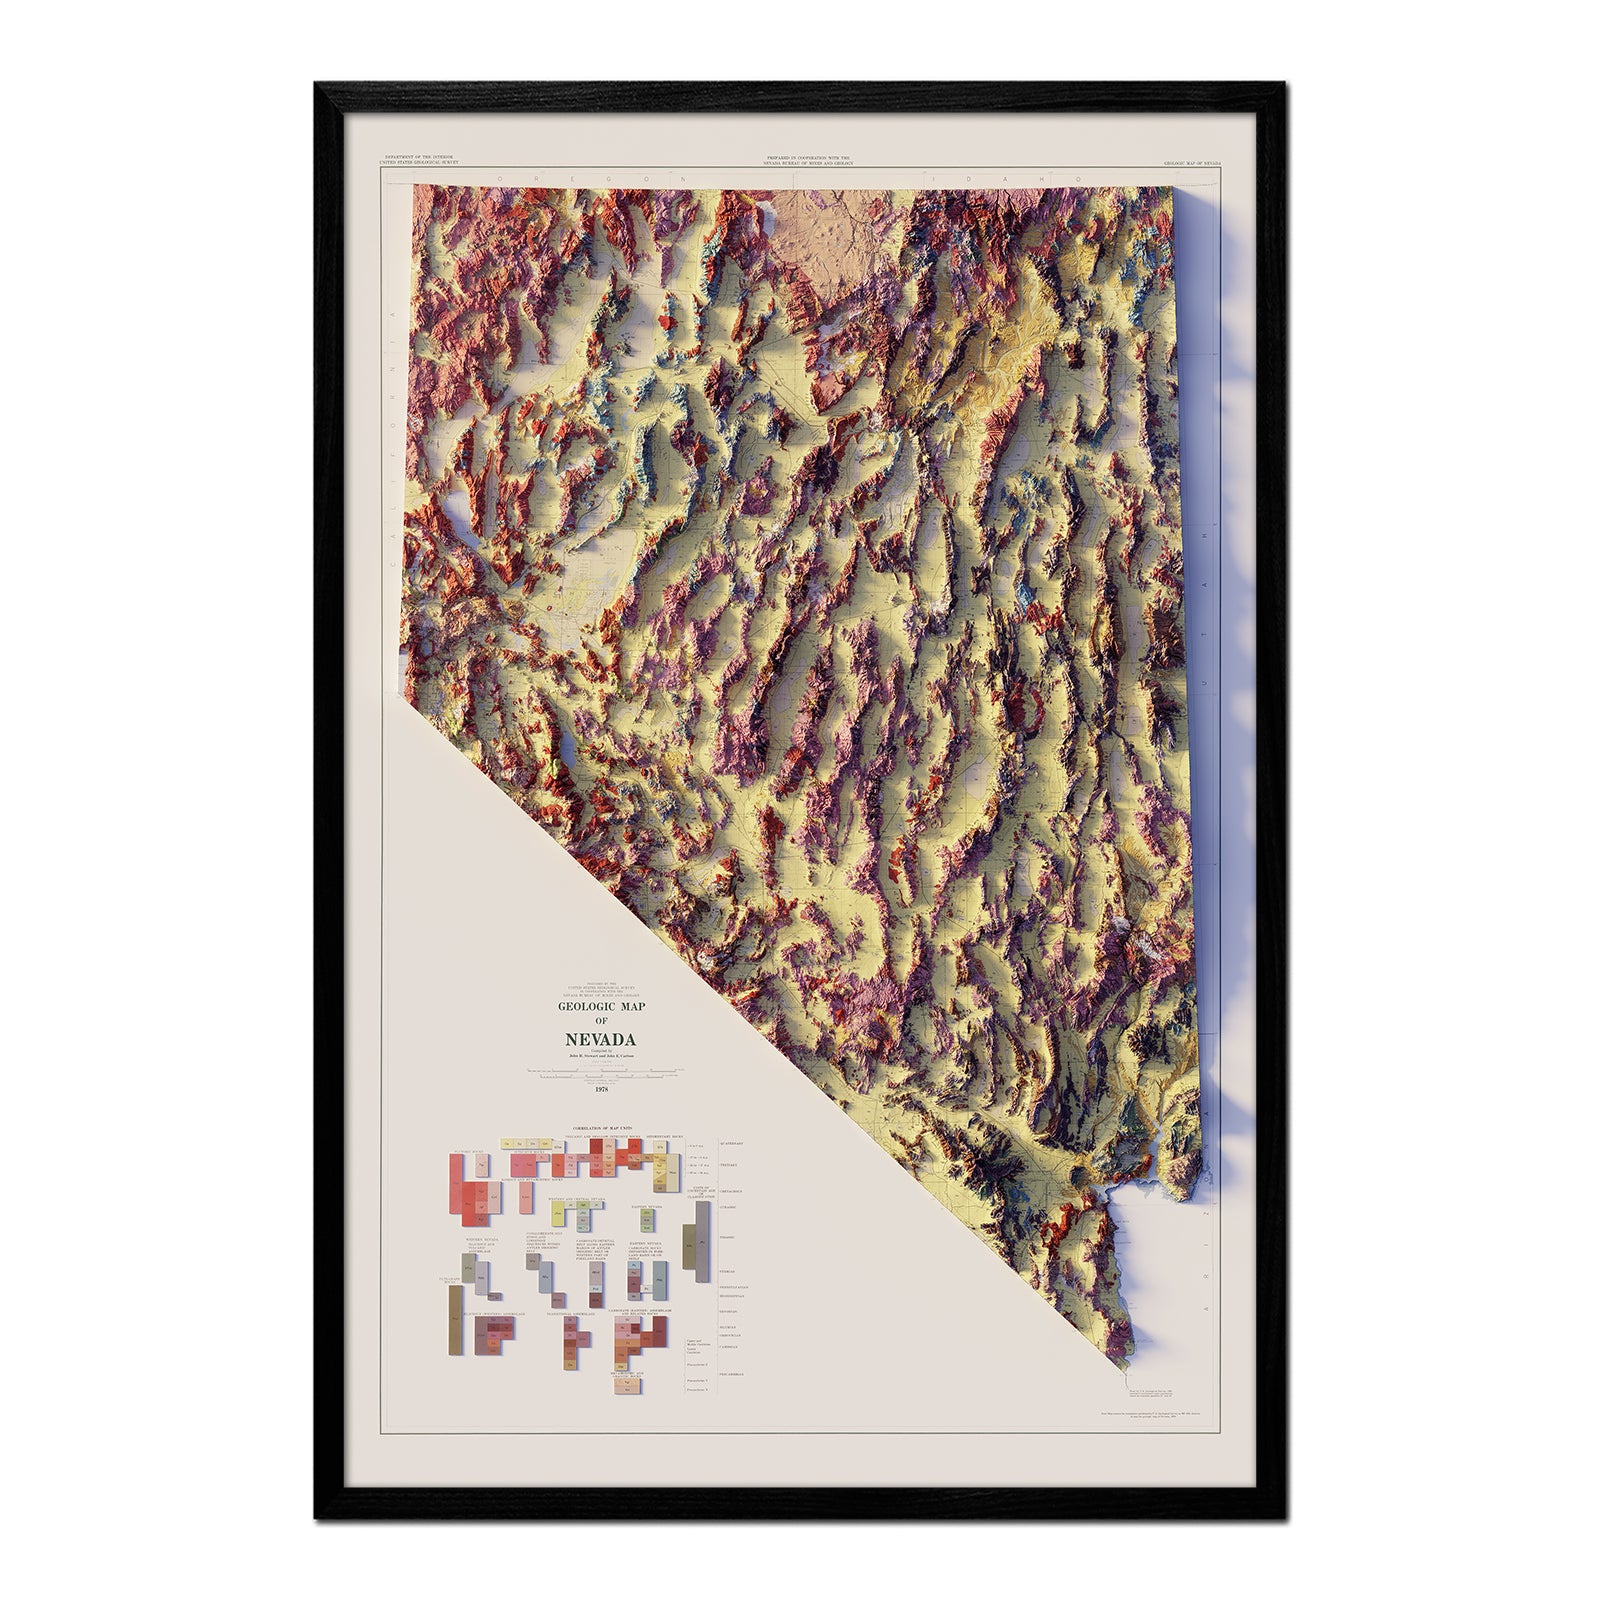 Nevada Relief Map - 1978